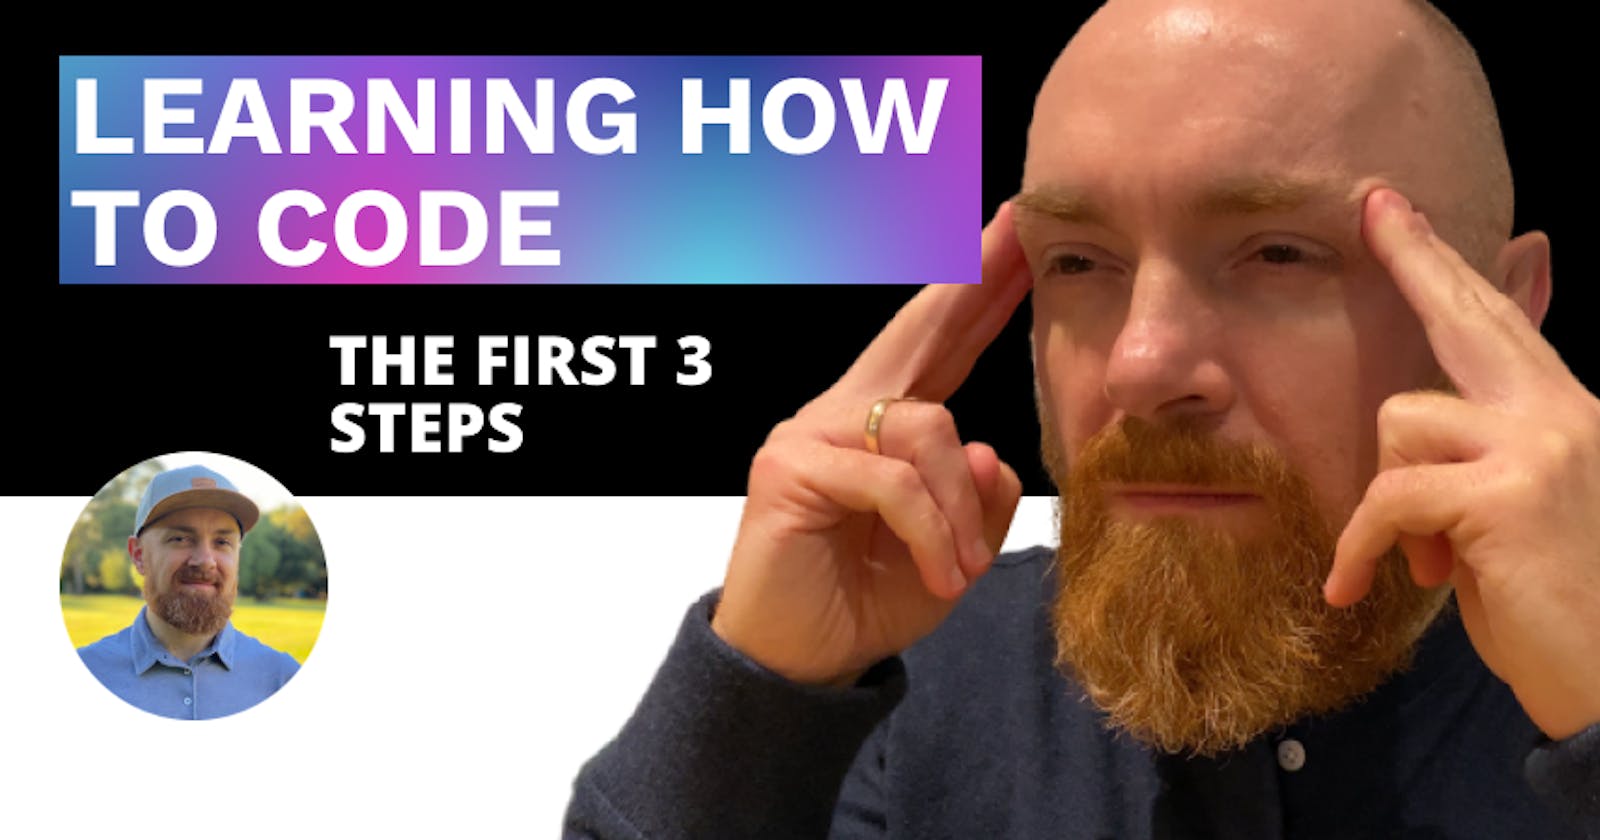 Learning how to code: the first 3 steps